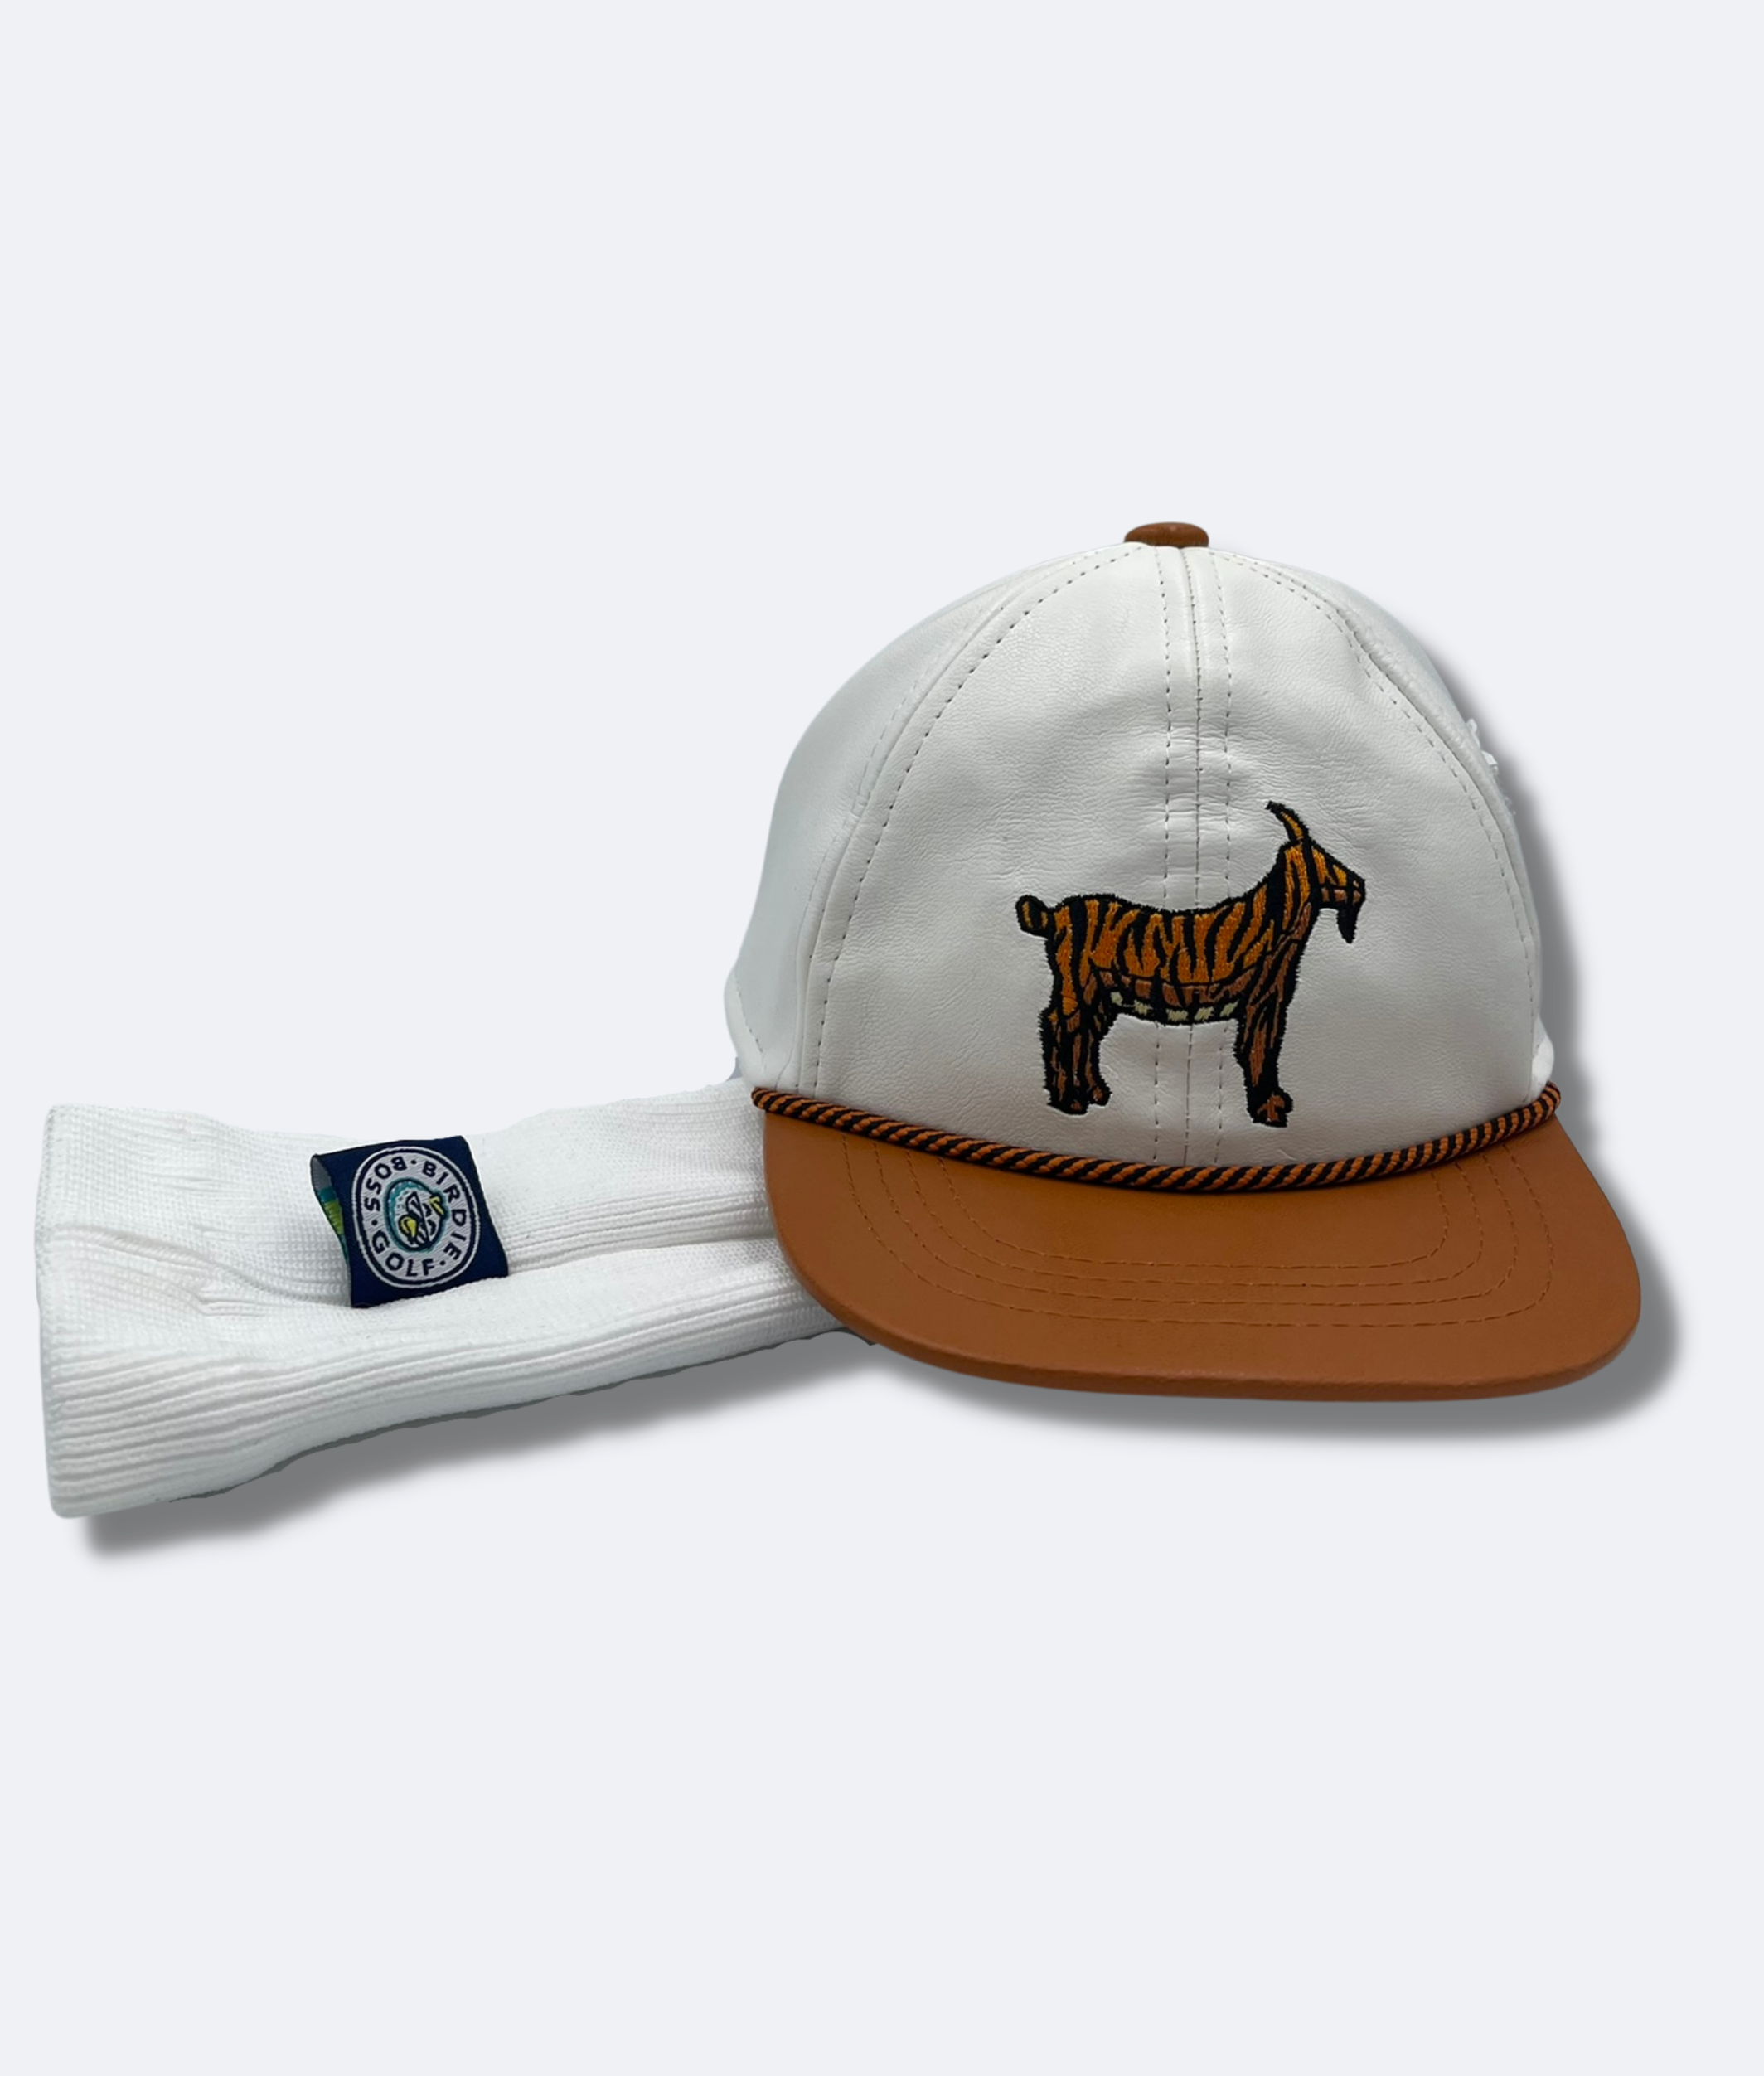 Tiger G.O.A.T Hat Headcover